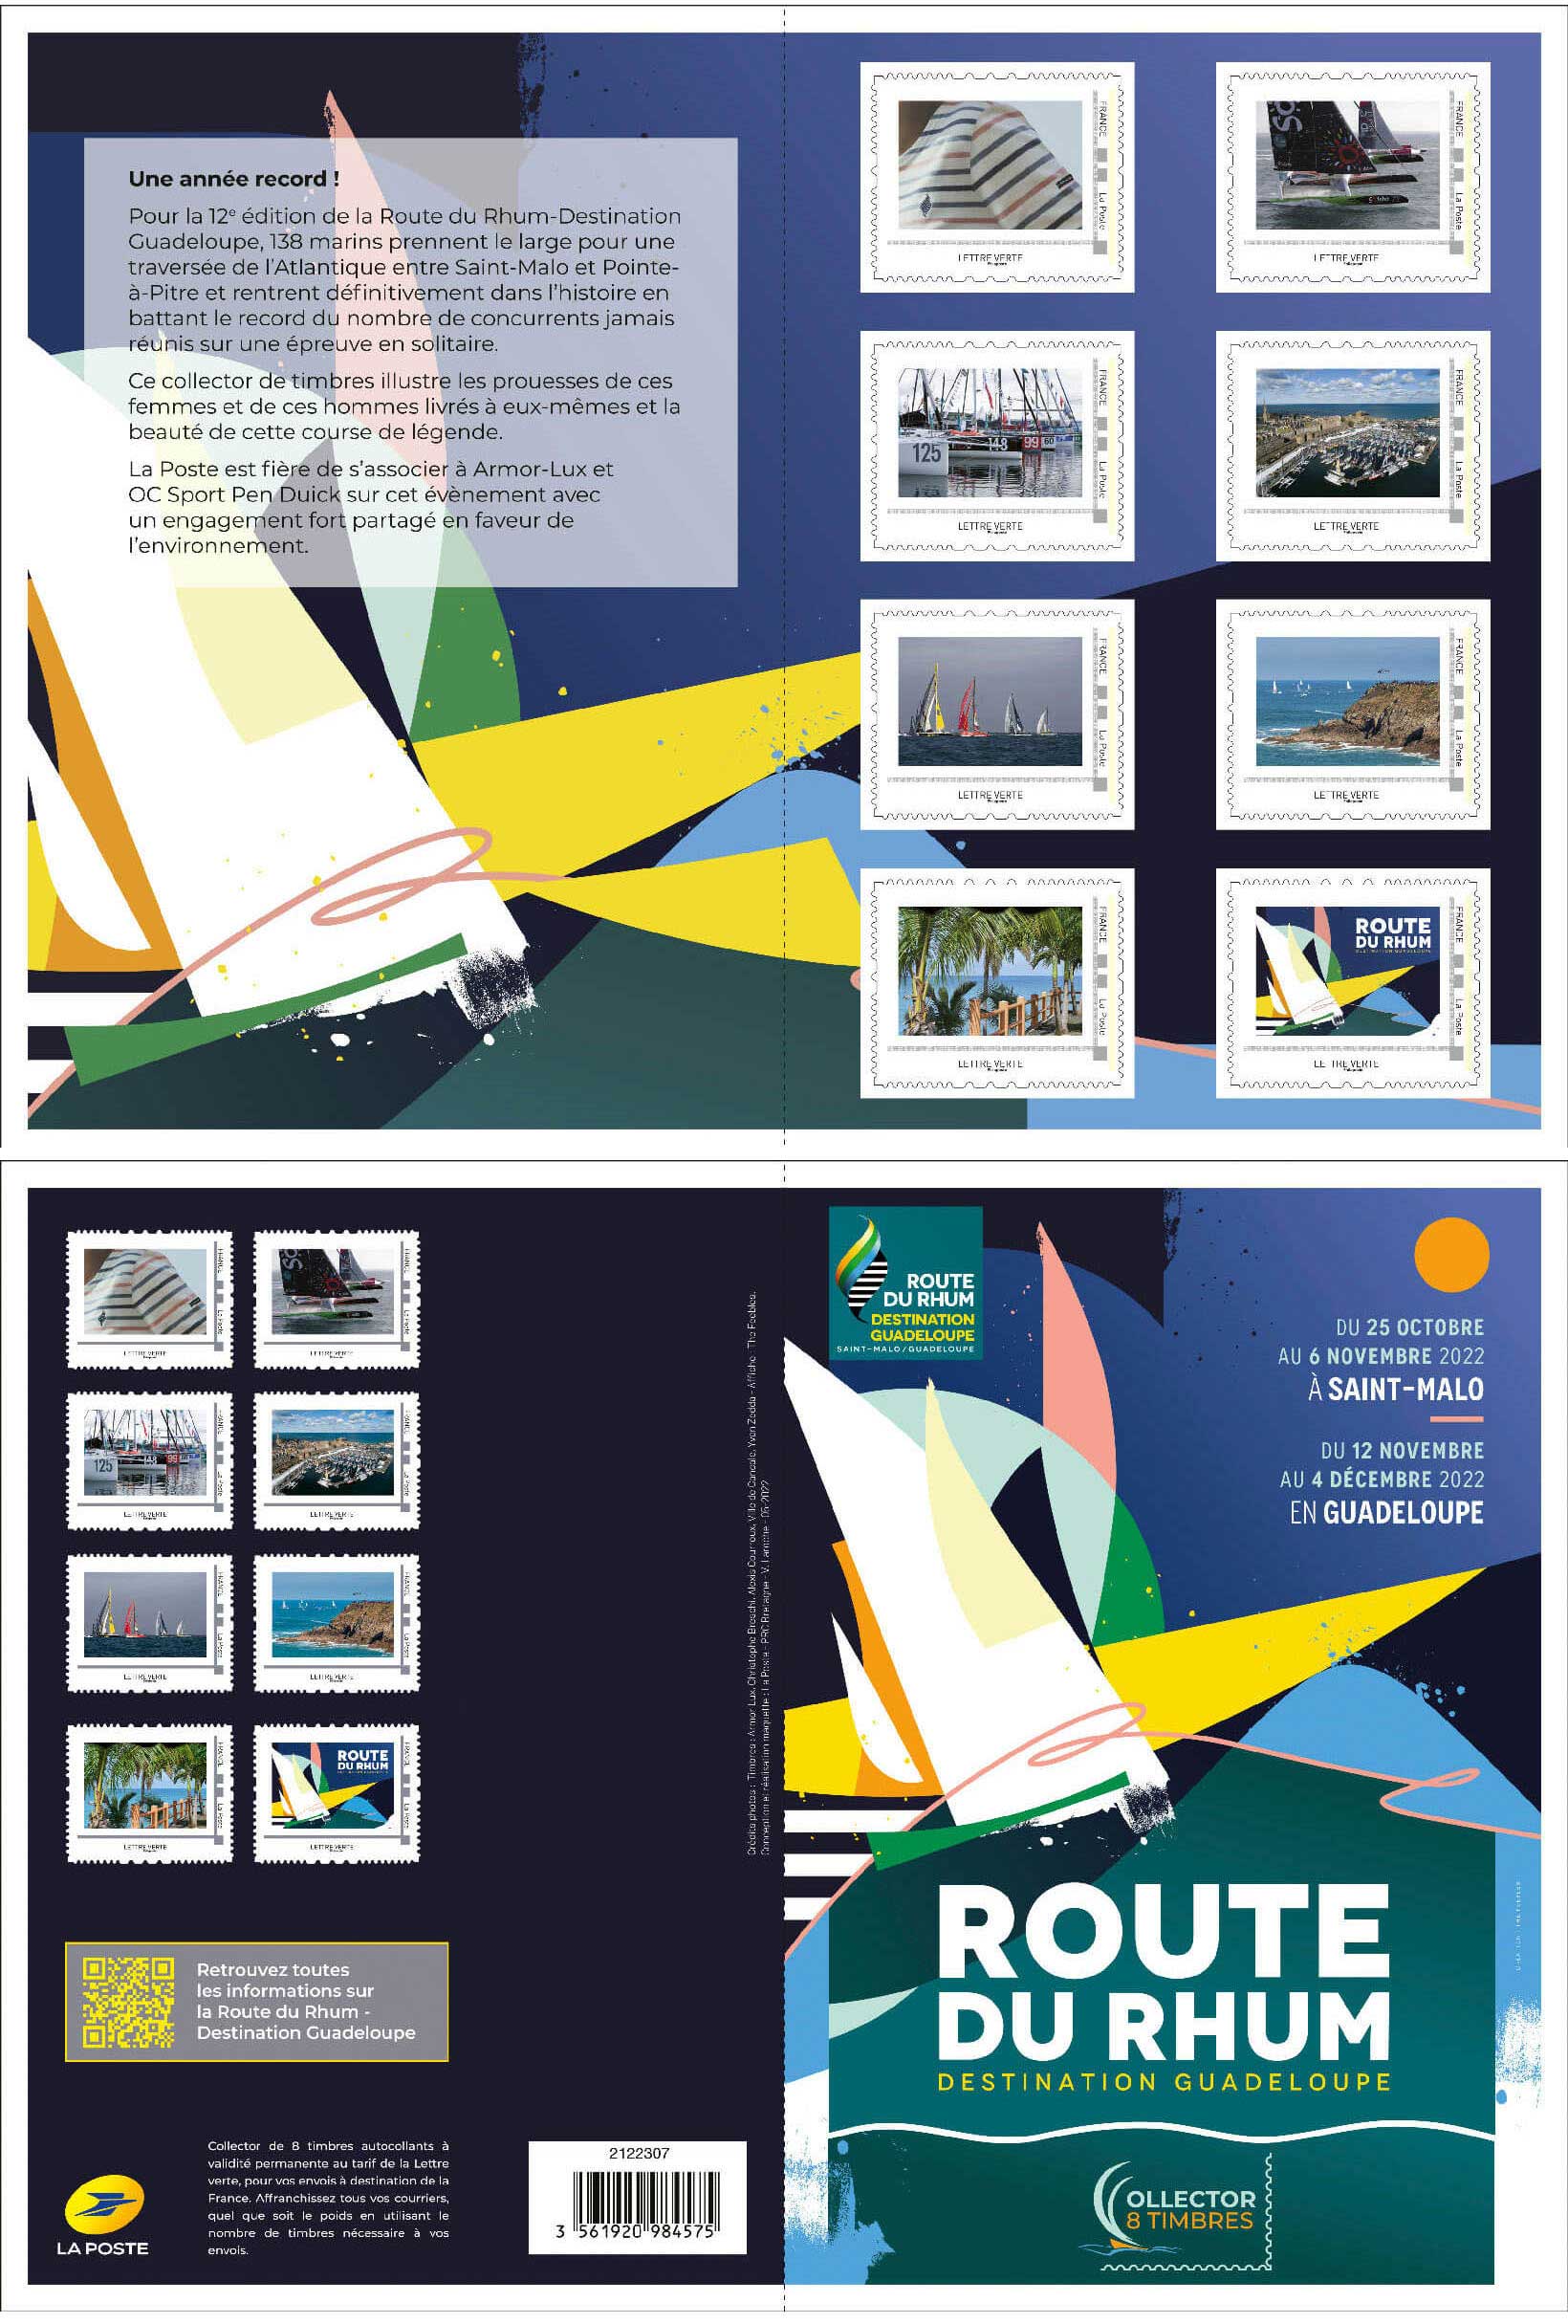 Collector 8 timbres - Route du rhum